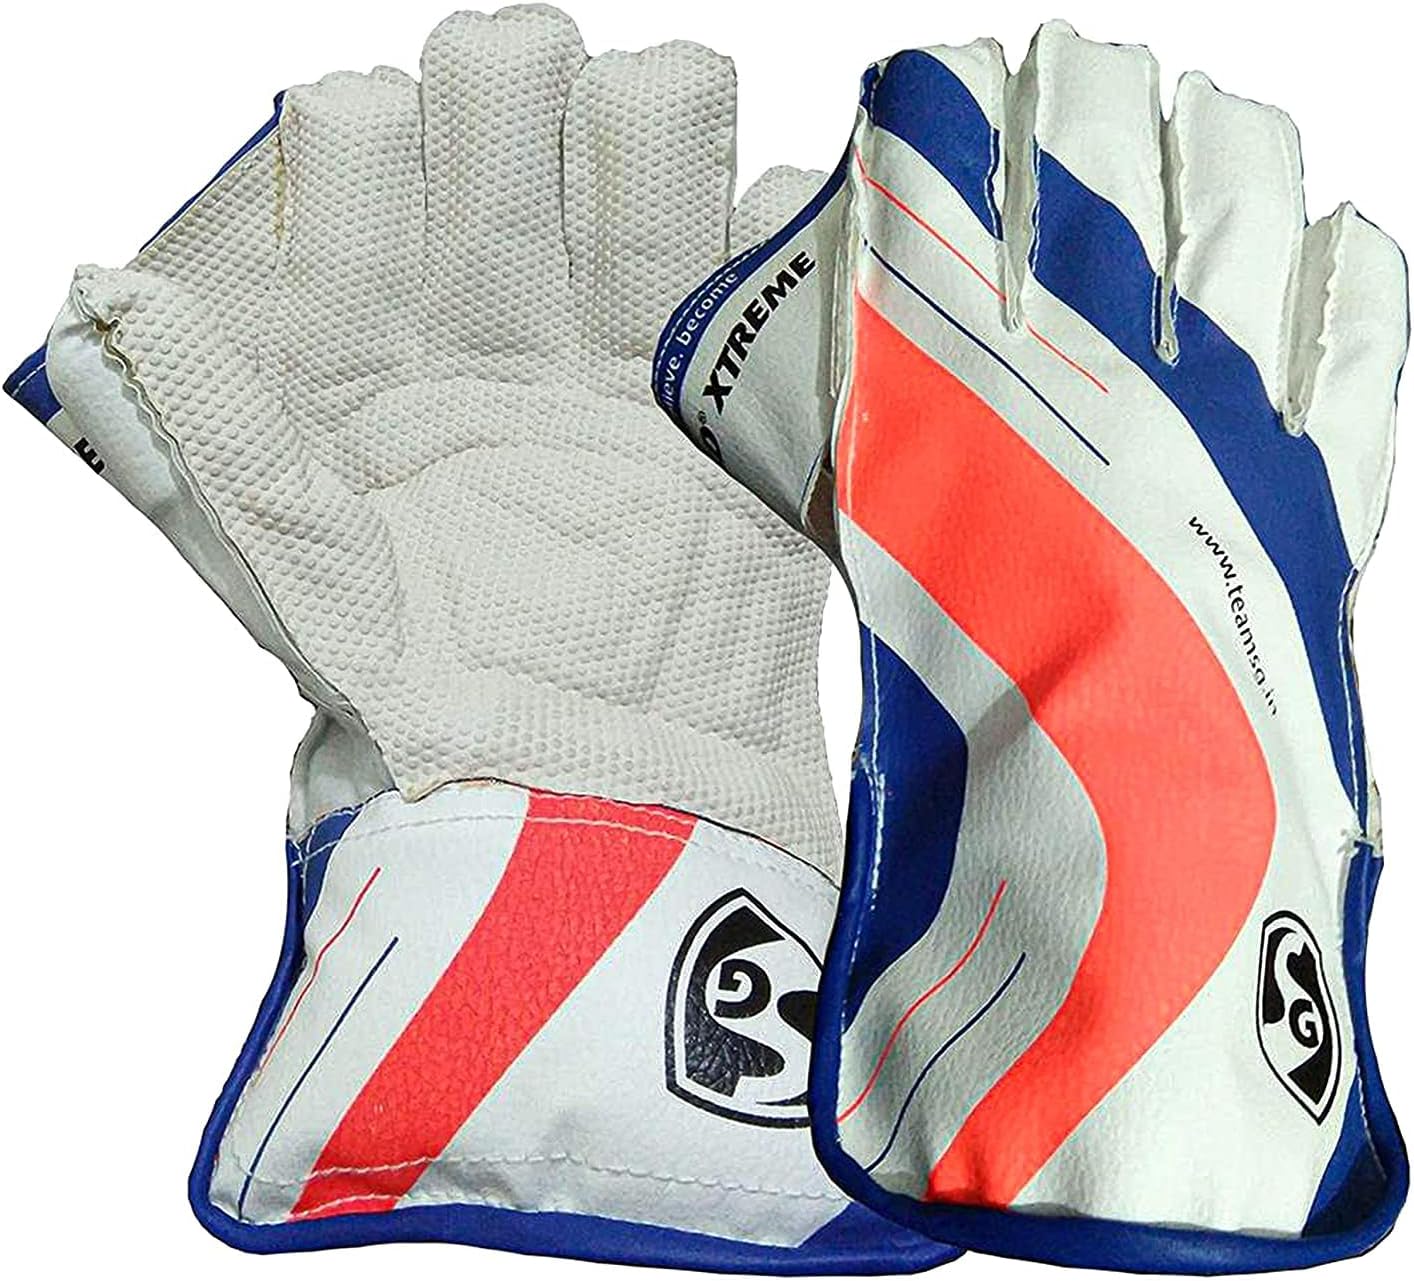 SG RSD Xtreme Wicket Keeping Gloves, Small Junior (Colour May Vary)